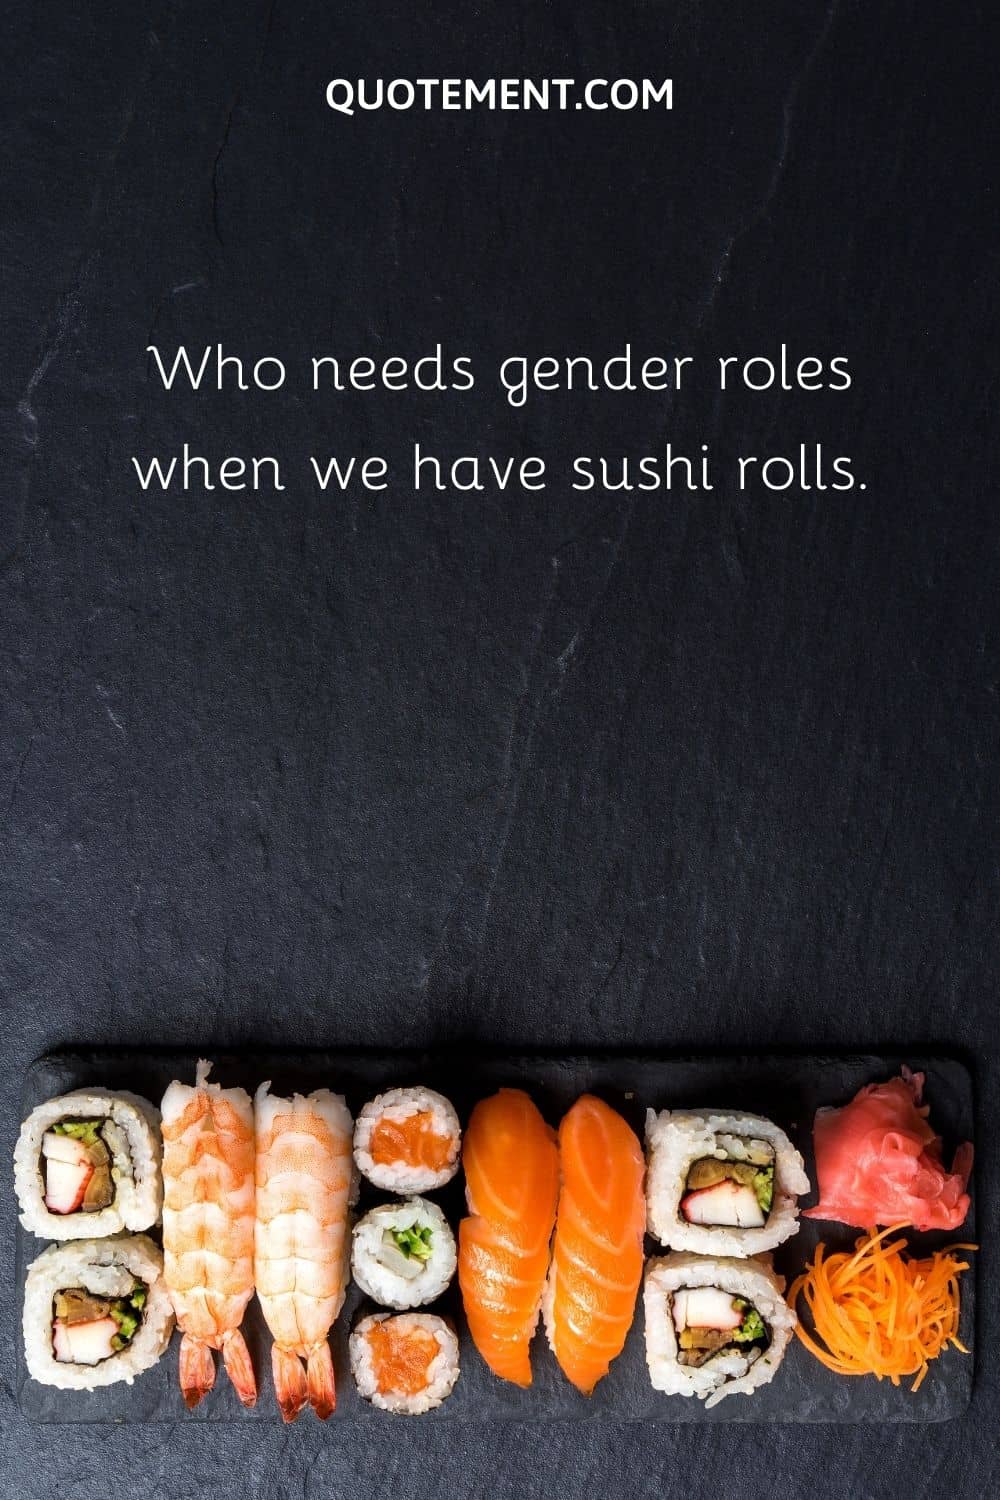 Who needs gender roles when we have sushi rolls.